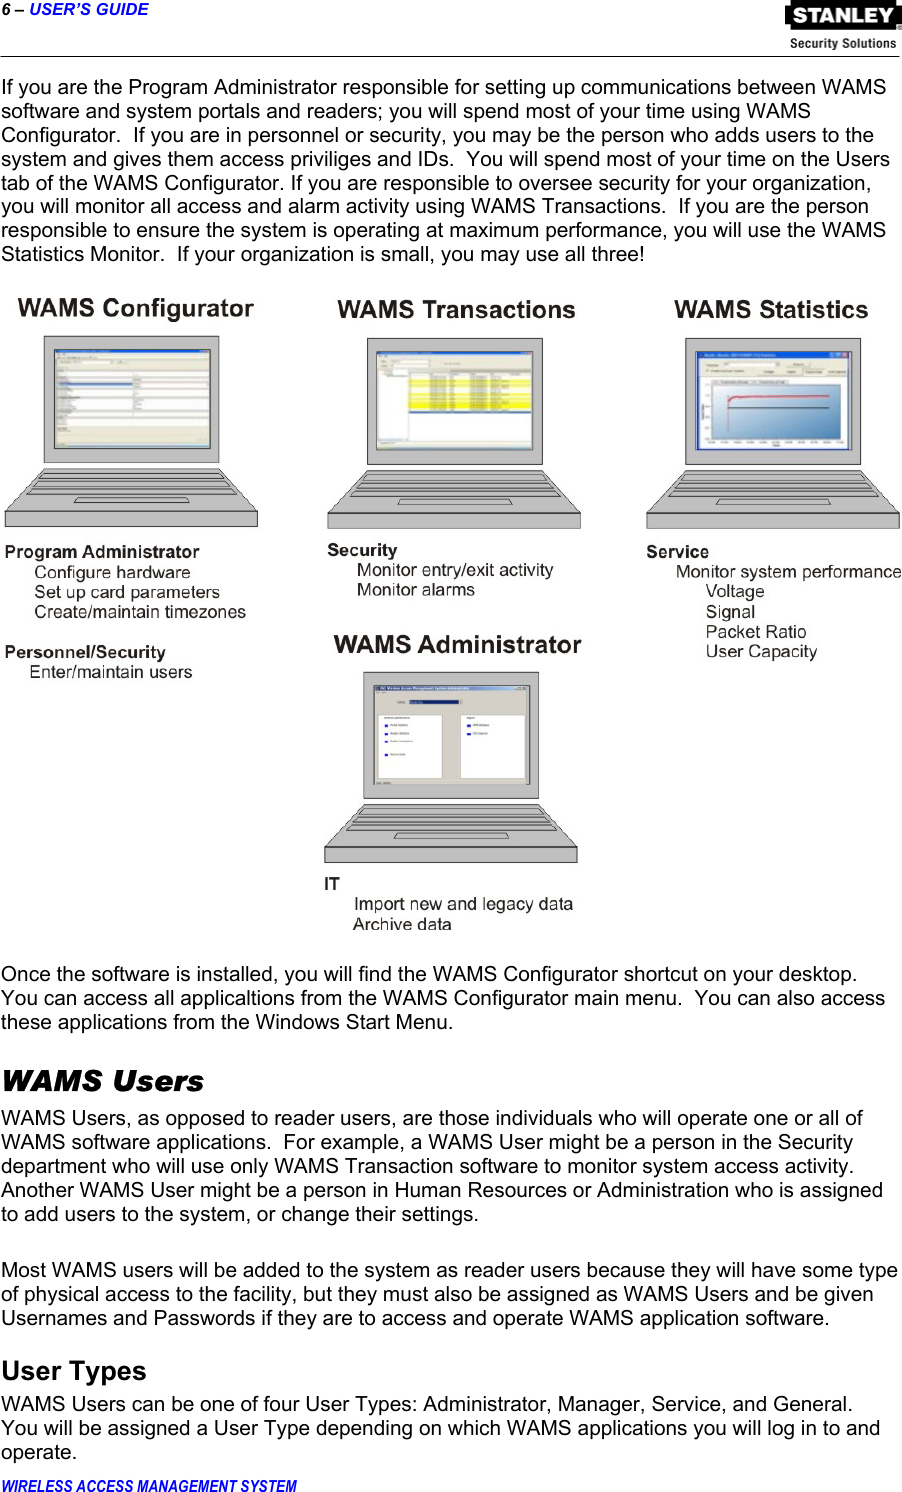 6 – USER’S GUIDE  WIRELESS ACCESS MANAGEMENT SYSTEM If you are the Program Administrator responsible for setting up communications between WAMS software and system portals and readers; you will spend most of your time using WAMS Configurator.  If you are in personnel or security, you may be the person who adds users to the system and gives them access priviliges and IDs.  You will spend most of your time on the Users tab of the WAMS Configurator. If you are responsible to oversee security for your organization, you will monitor all access and alarm activity using WAMS Transactions.  If you are the person responsible to ensure the system is operating at maximum performance, you will use the WAMS Statistics Monitor.  If your organization is small, you may use all three!      Once the software is installed, you will find the WAMS Configurator shortcut on your desktop.  You can access all applicaltions from the WAMS Configurator main menu.  You can also access these applications from the Windows Start Menu. WAMS Users WAMS Users, as opposed to reader users, are those individuals who will operate one or all of WAMS software applications.  For example, a WAMS User might be a person in the Security department who will use only WAMS Transaction software to monitor system access activity.  Another WAMS User might be a person in Human Resources or Administration who is assigned to add users to the system, or change their settings.    Most WAMS users will be added to the system as reader users because they will have some type of physical access to the facility, but they must also be assigned as WAMS Users and be given Usernames and Passwords if they are to access and operate WAMS application software. User Types WAMS Users can be one of four User Types: Administrator, Manager, Service, and General.  You will be assigned a User Type depending on which WAMS applications you will log in to and operate. 